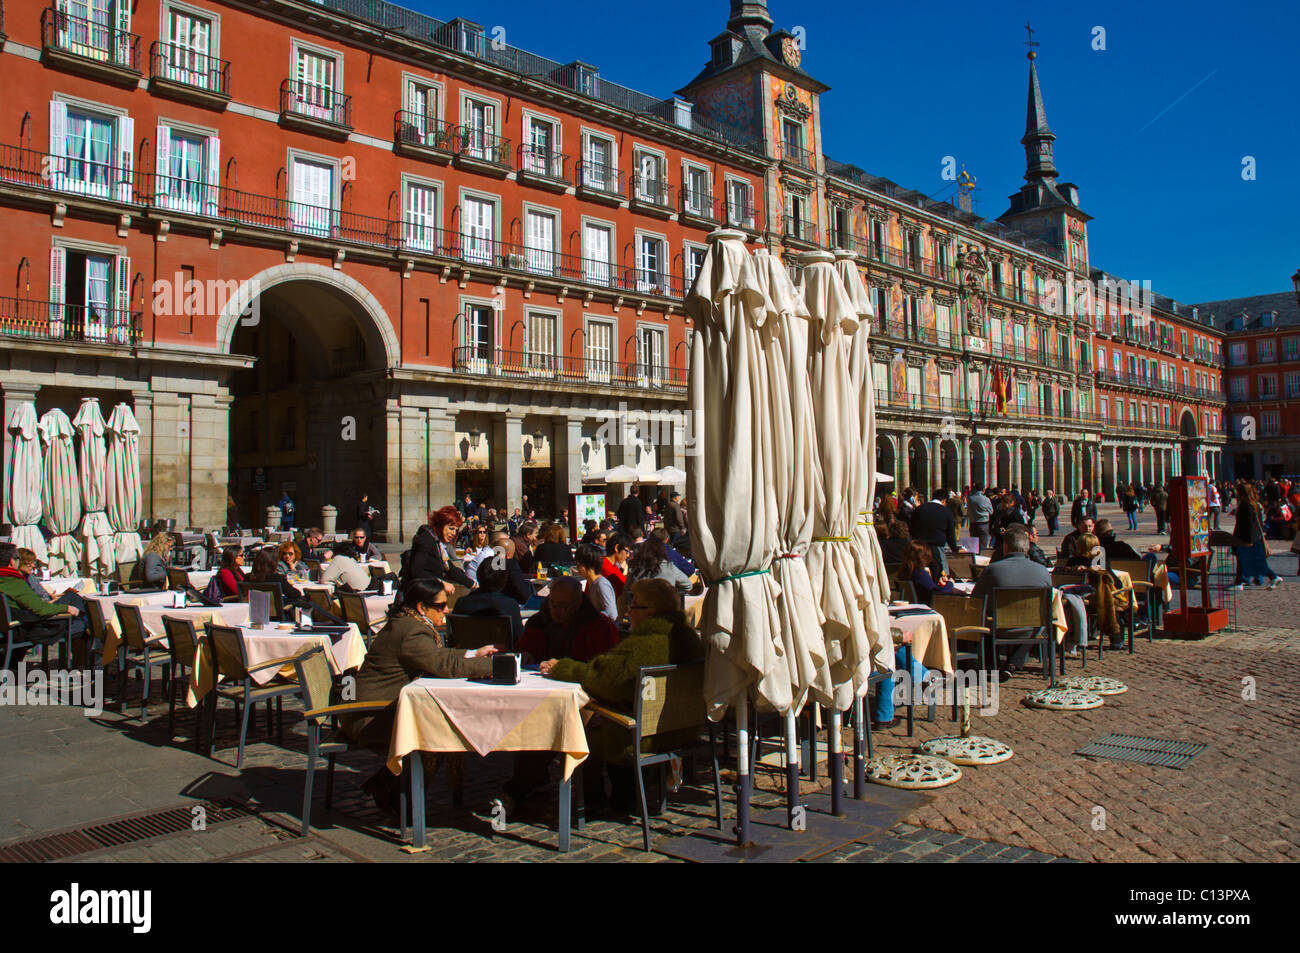 Restaurant and cafe terraces Plaza Mayor square central Madrid Spain Europe Stock Photo